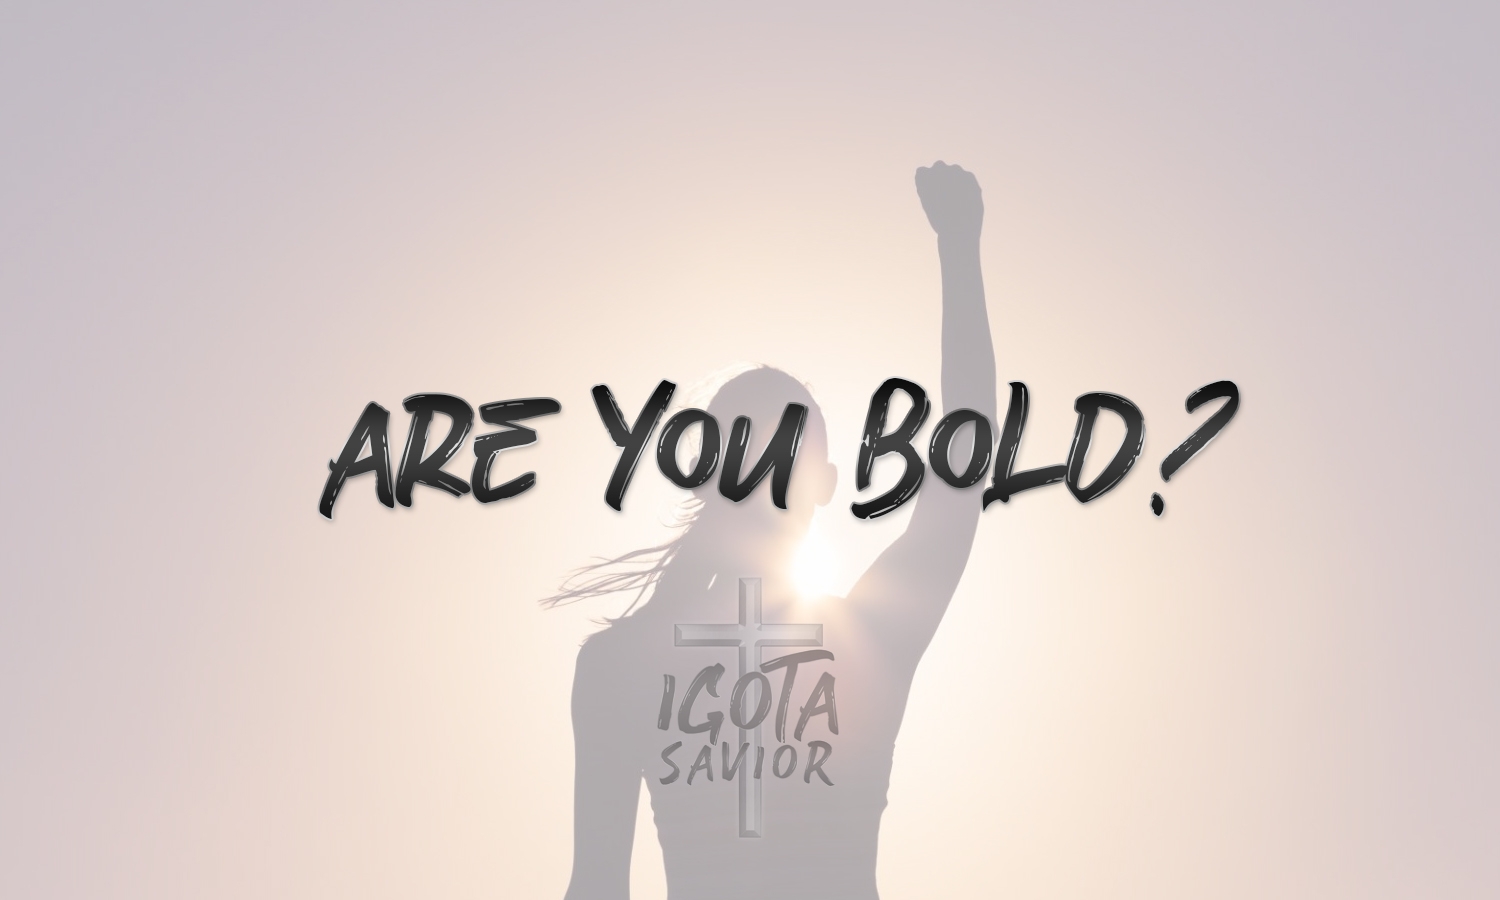 Are You Bold?